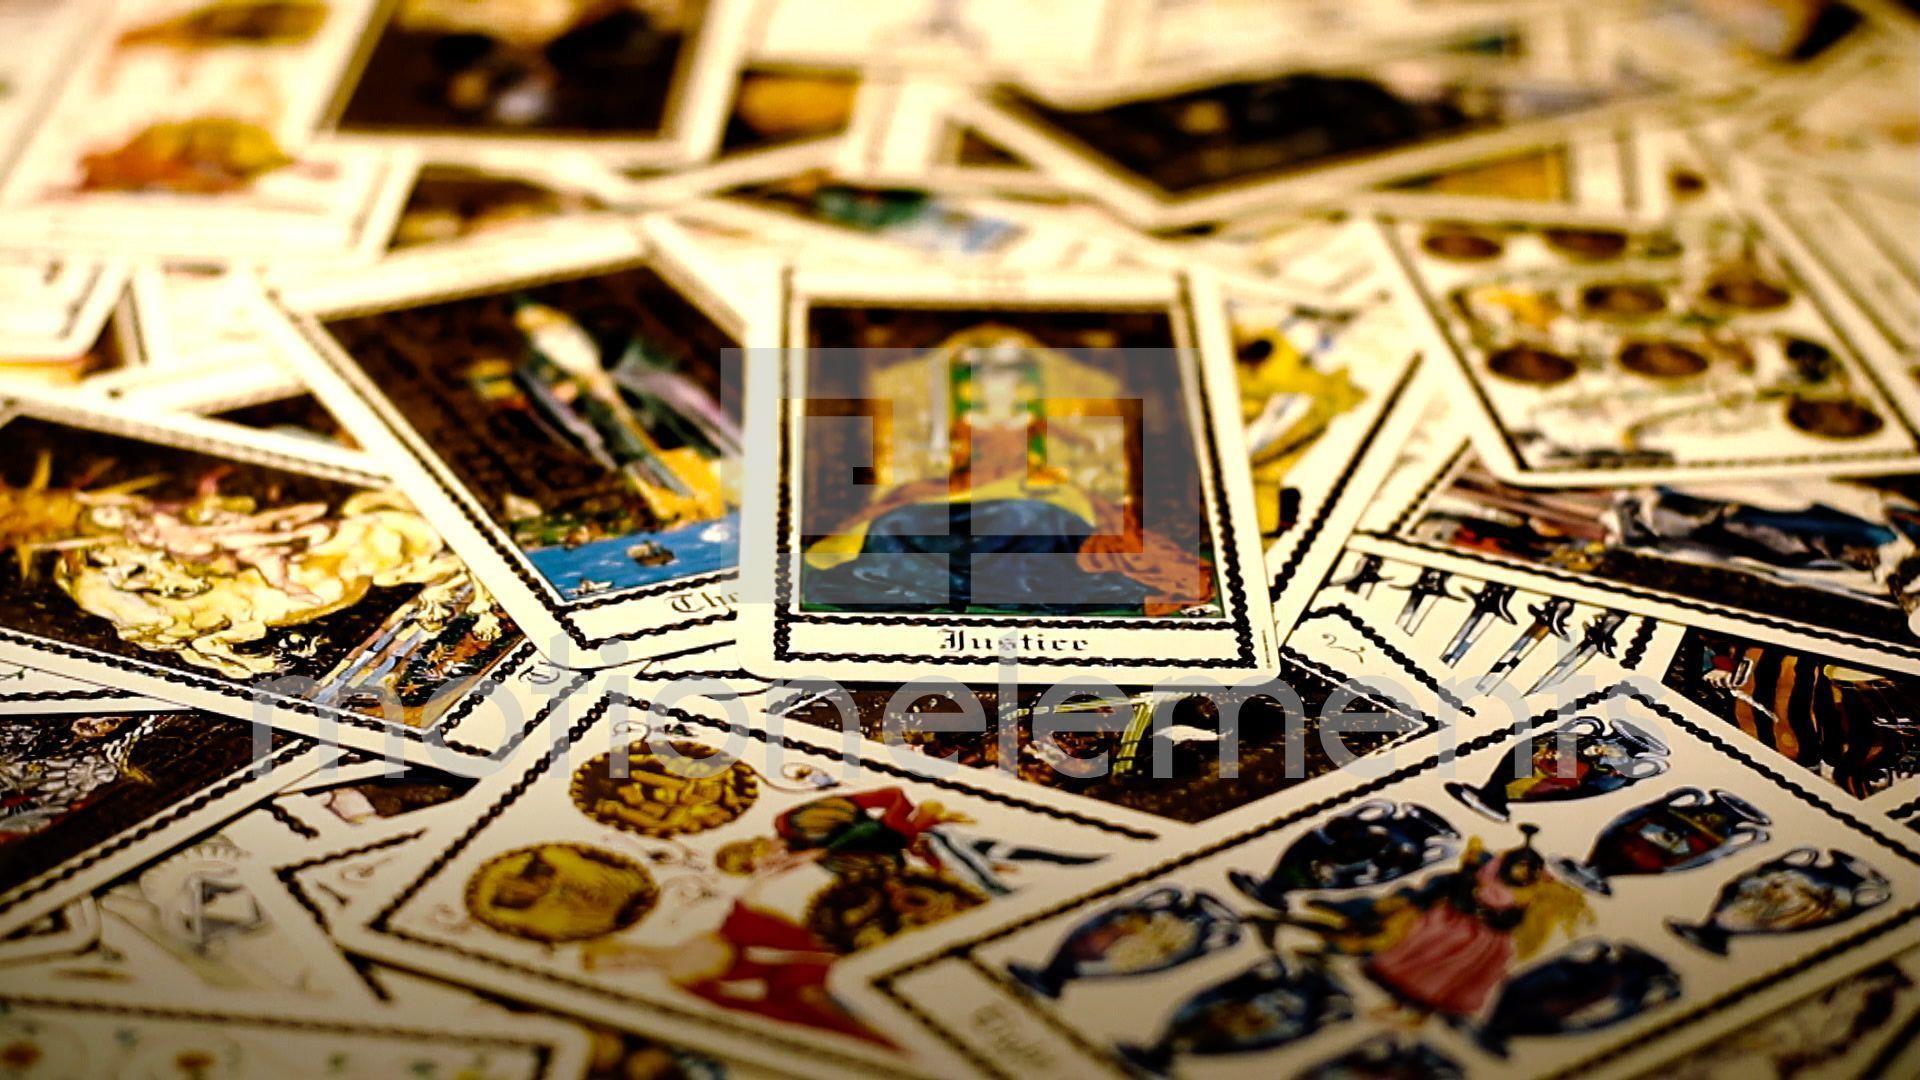 Awesome 38 Tarot Wallpaper. HD Quality Image BsnSCB Gallery